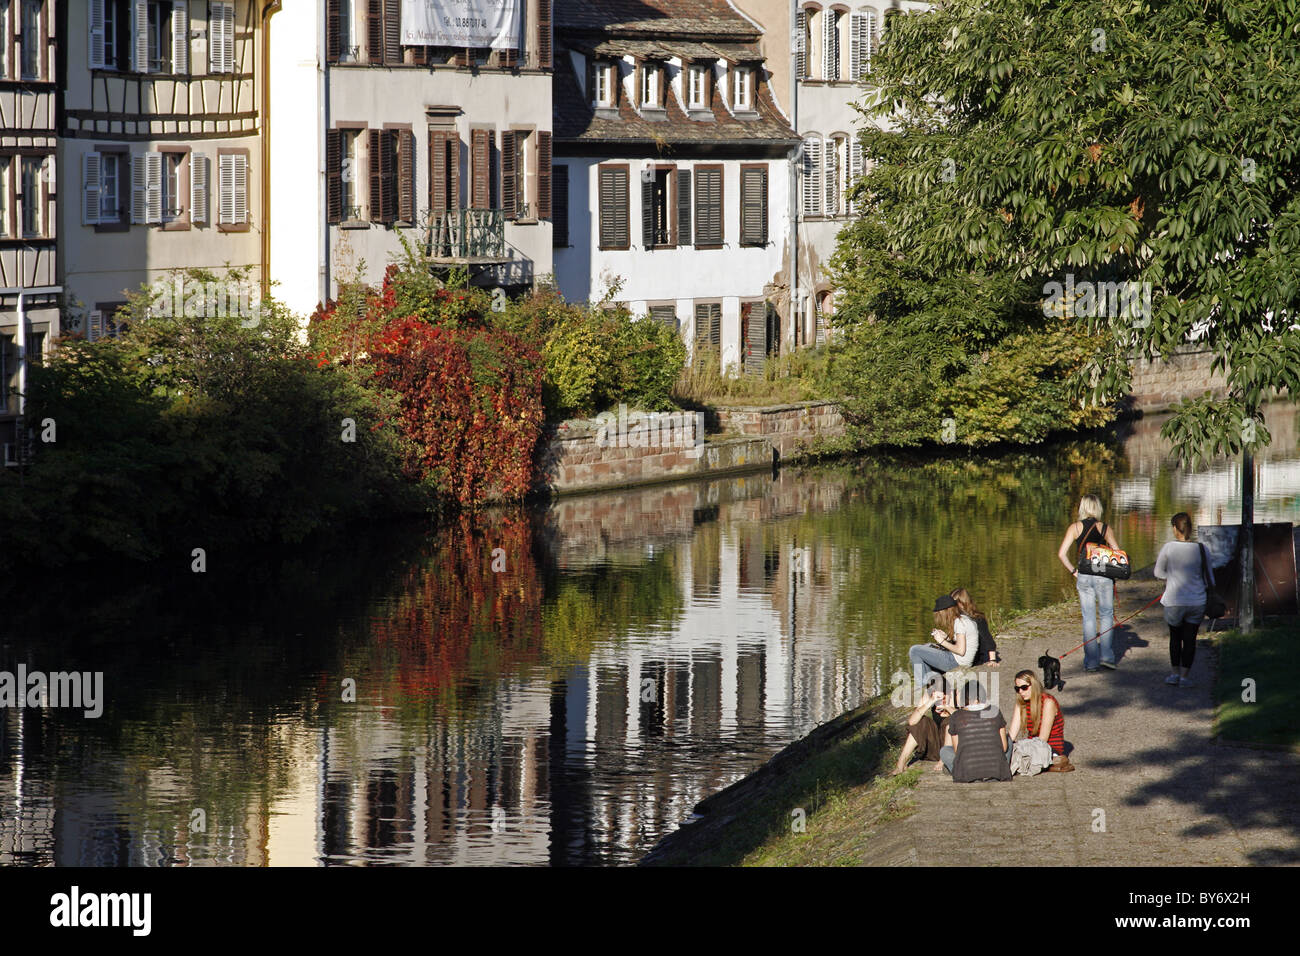 France Alsace Strasbourg sunny Sunday afternoon canal side timbered building windows and shutters Stock Photo